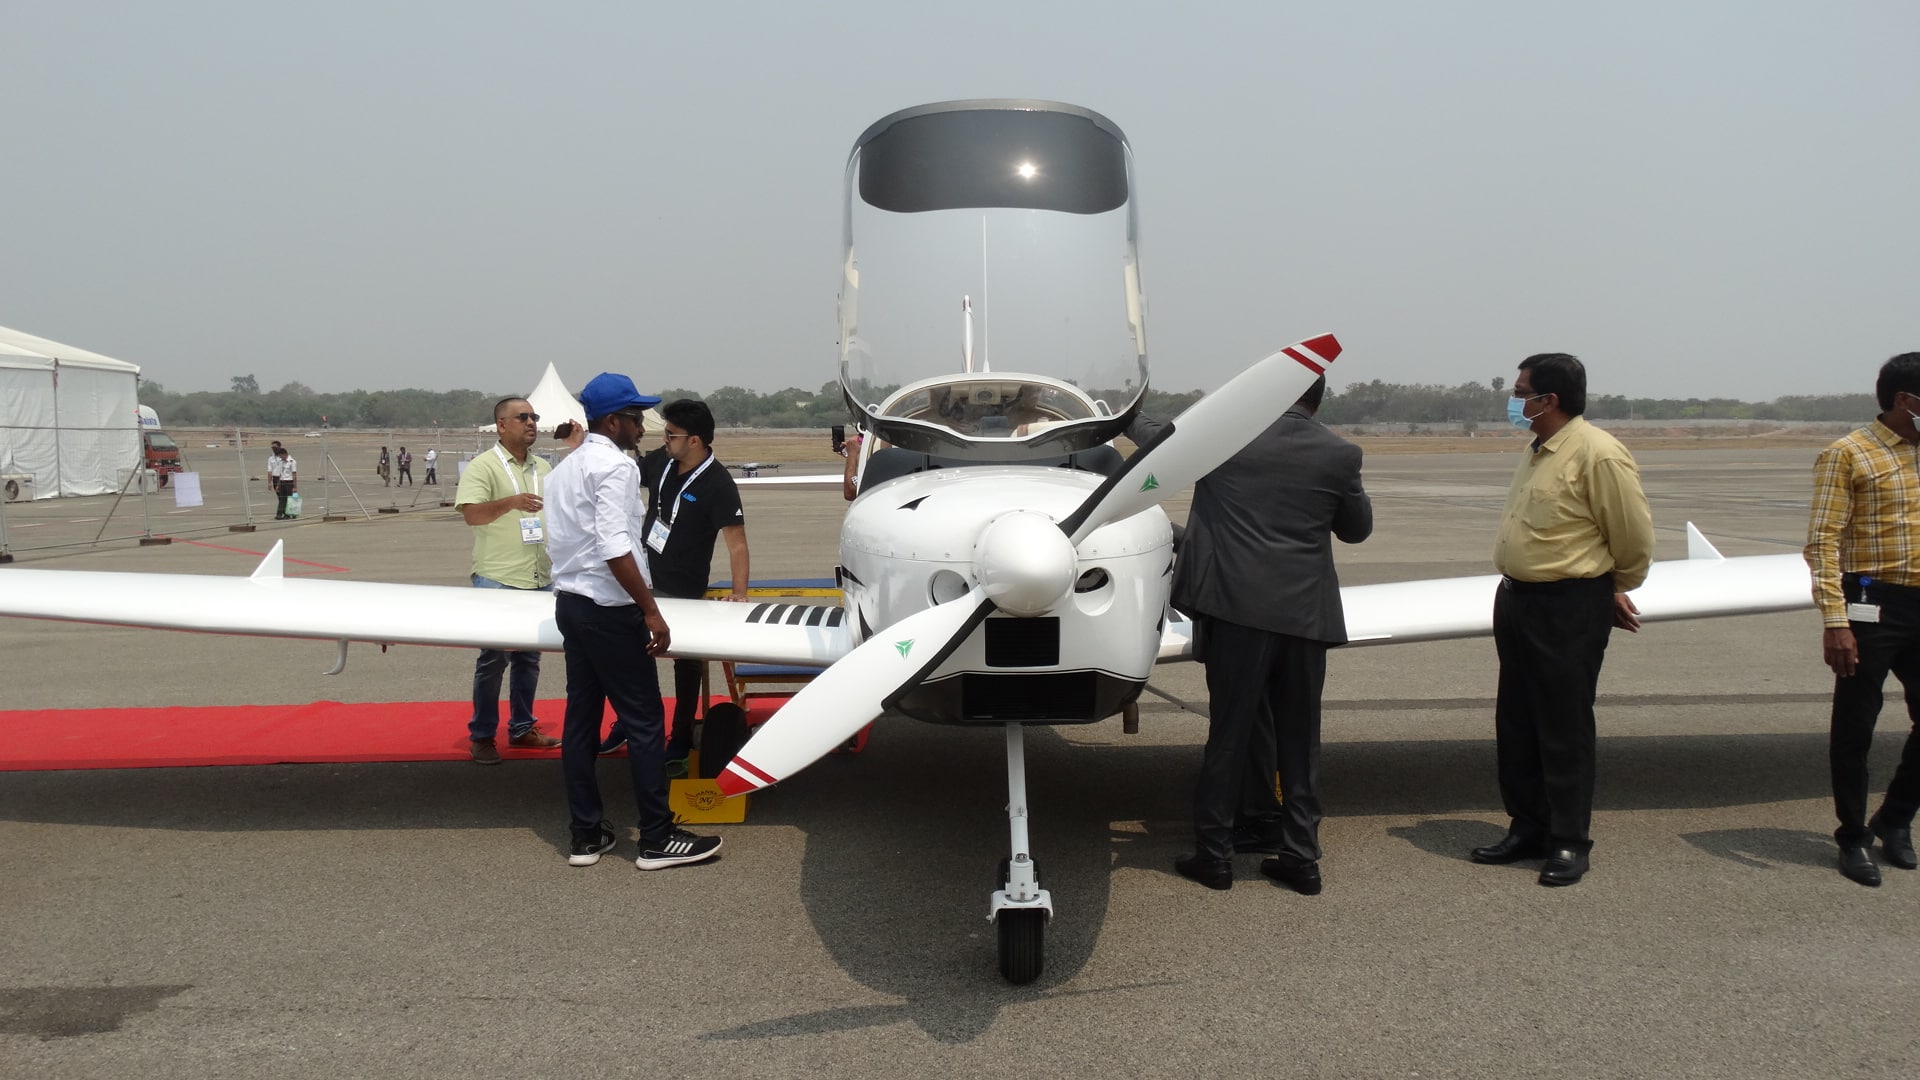 Meet the HANSA-NG, a two-seat flying training aircraft developed in India.